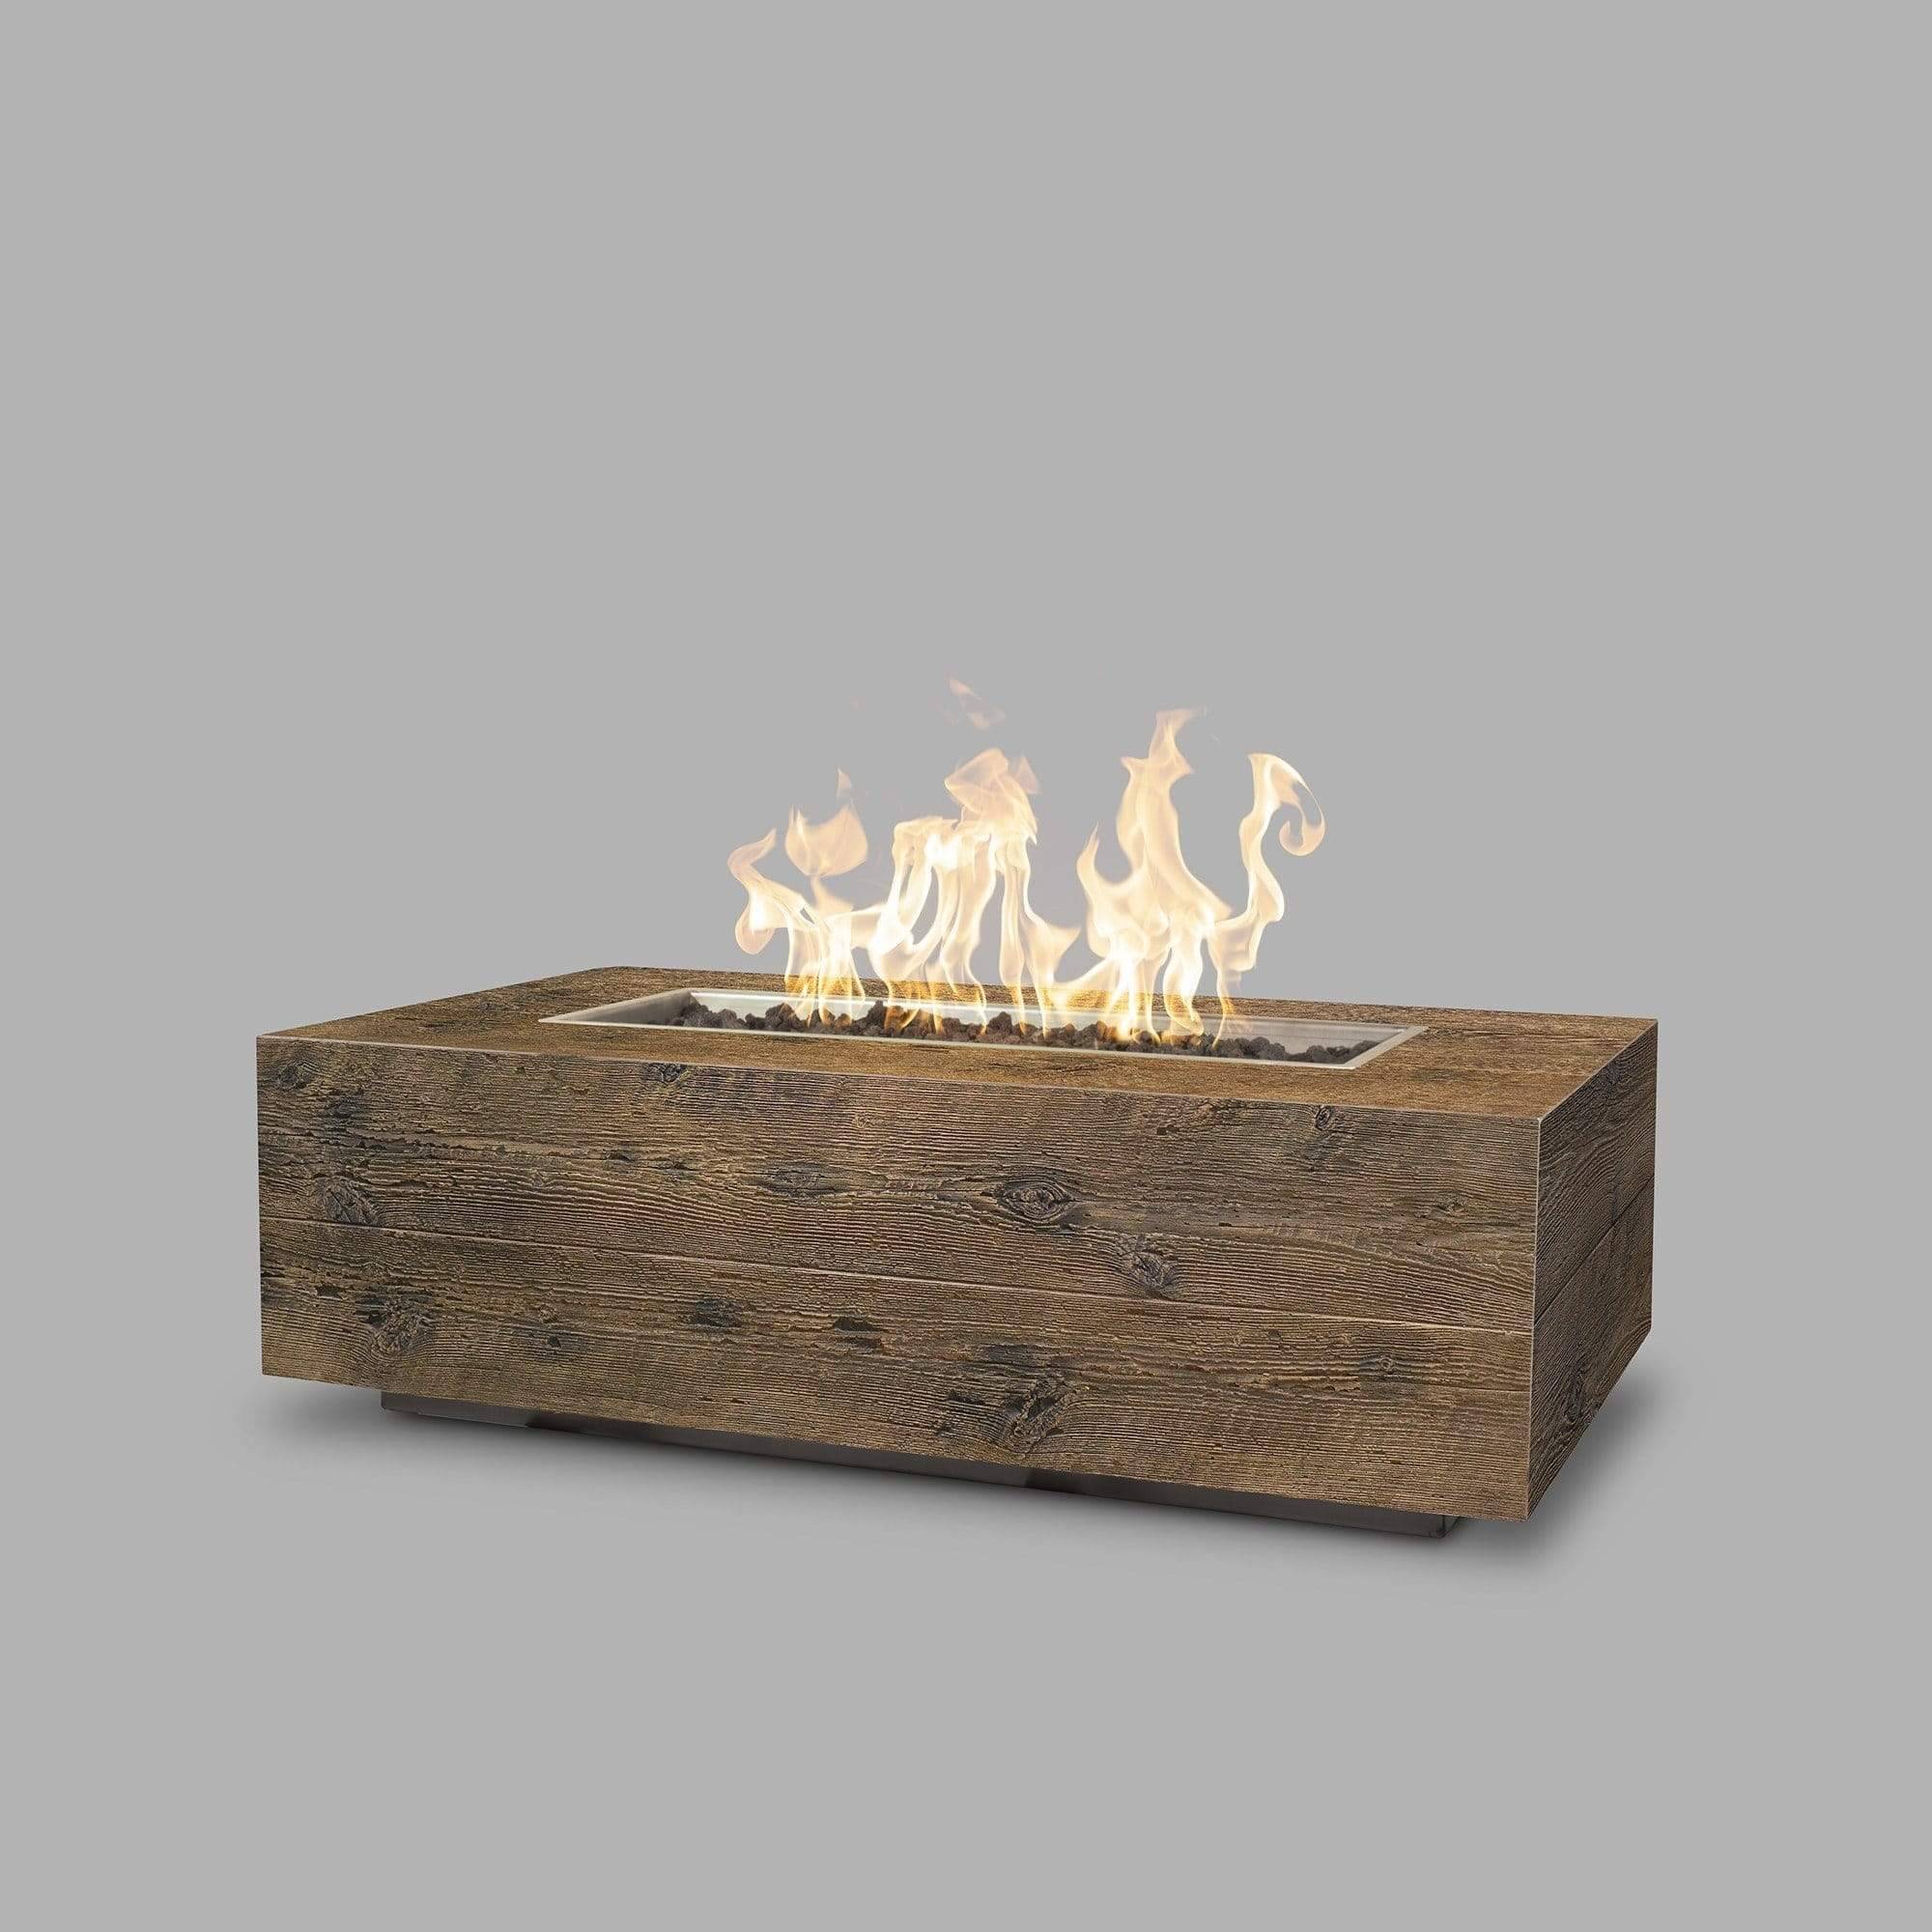 The Outdoor Plus Coronado Wood Grain Fire Pit in Oak with flame on white background